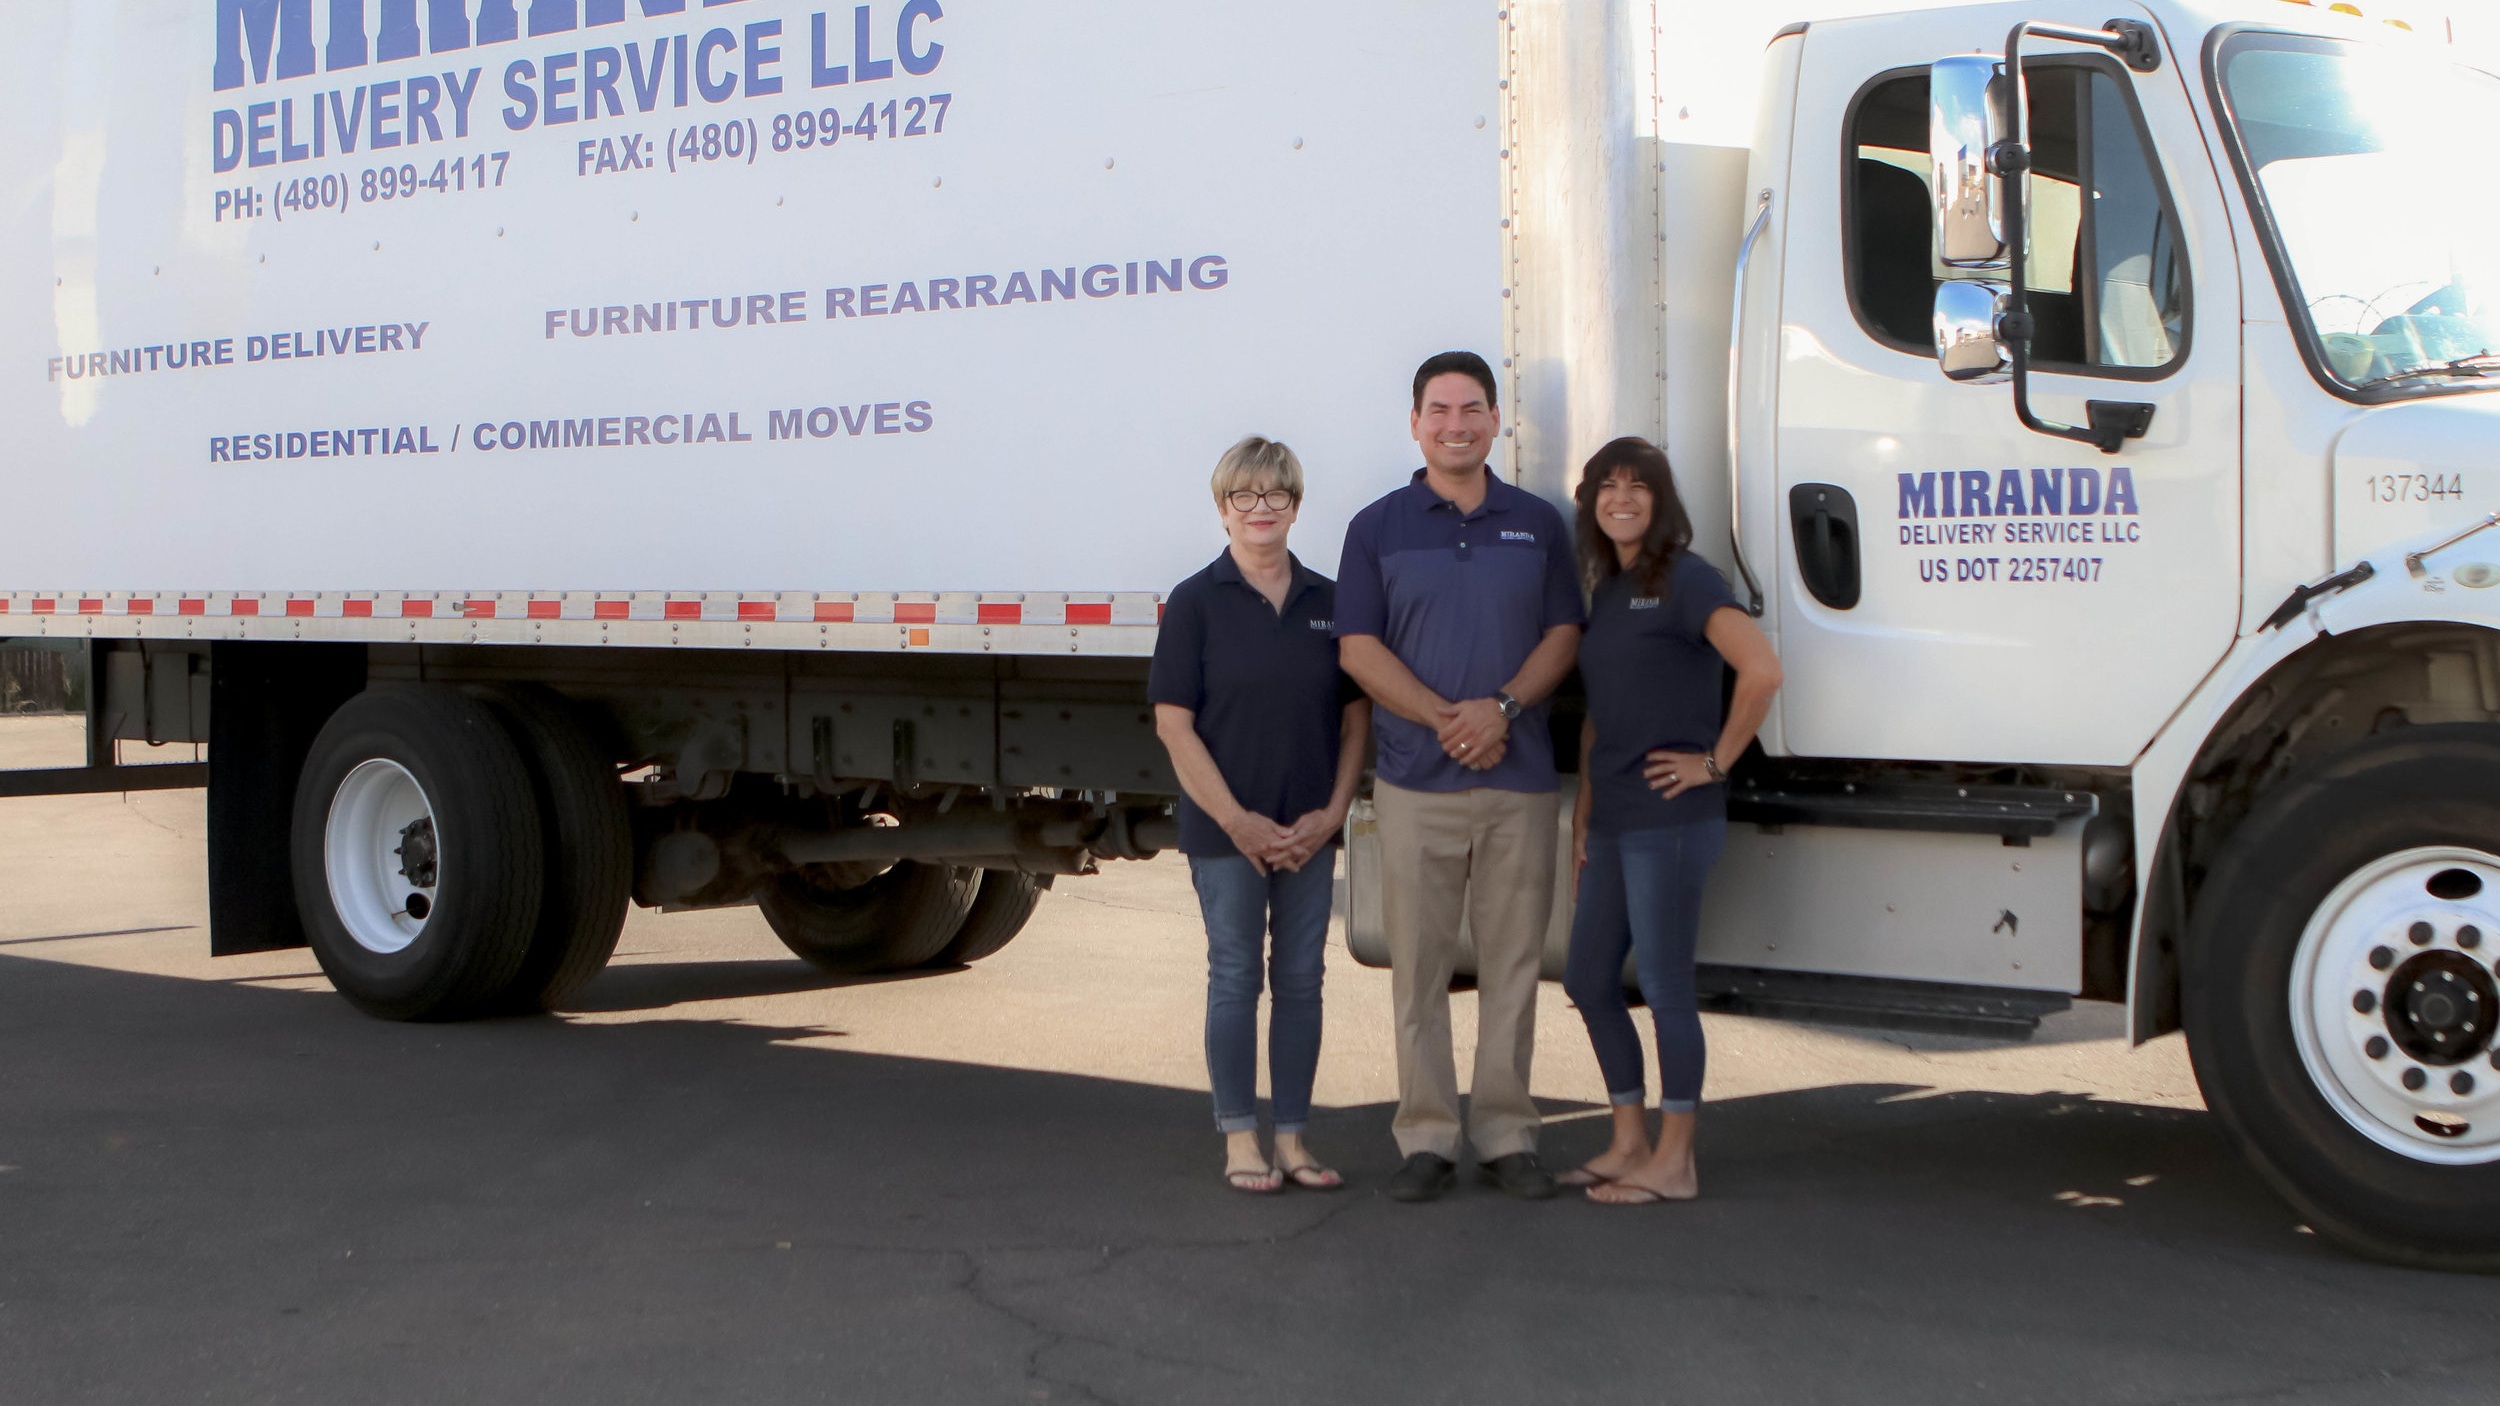 What Do Furniture Mover & Deliverers Do?